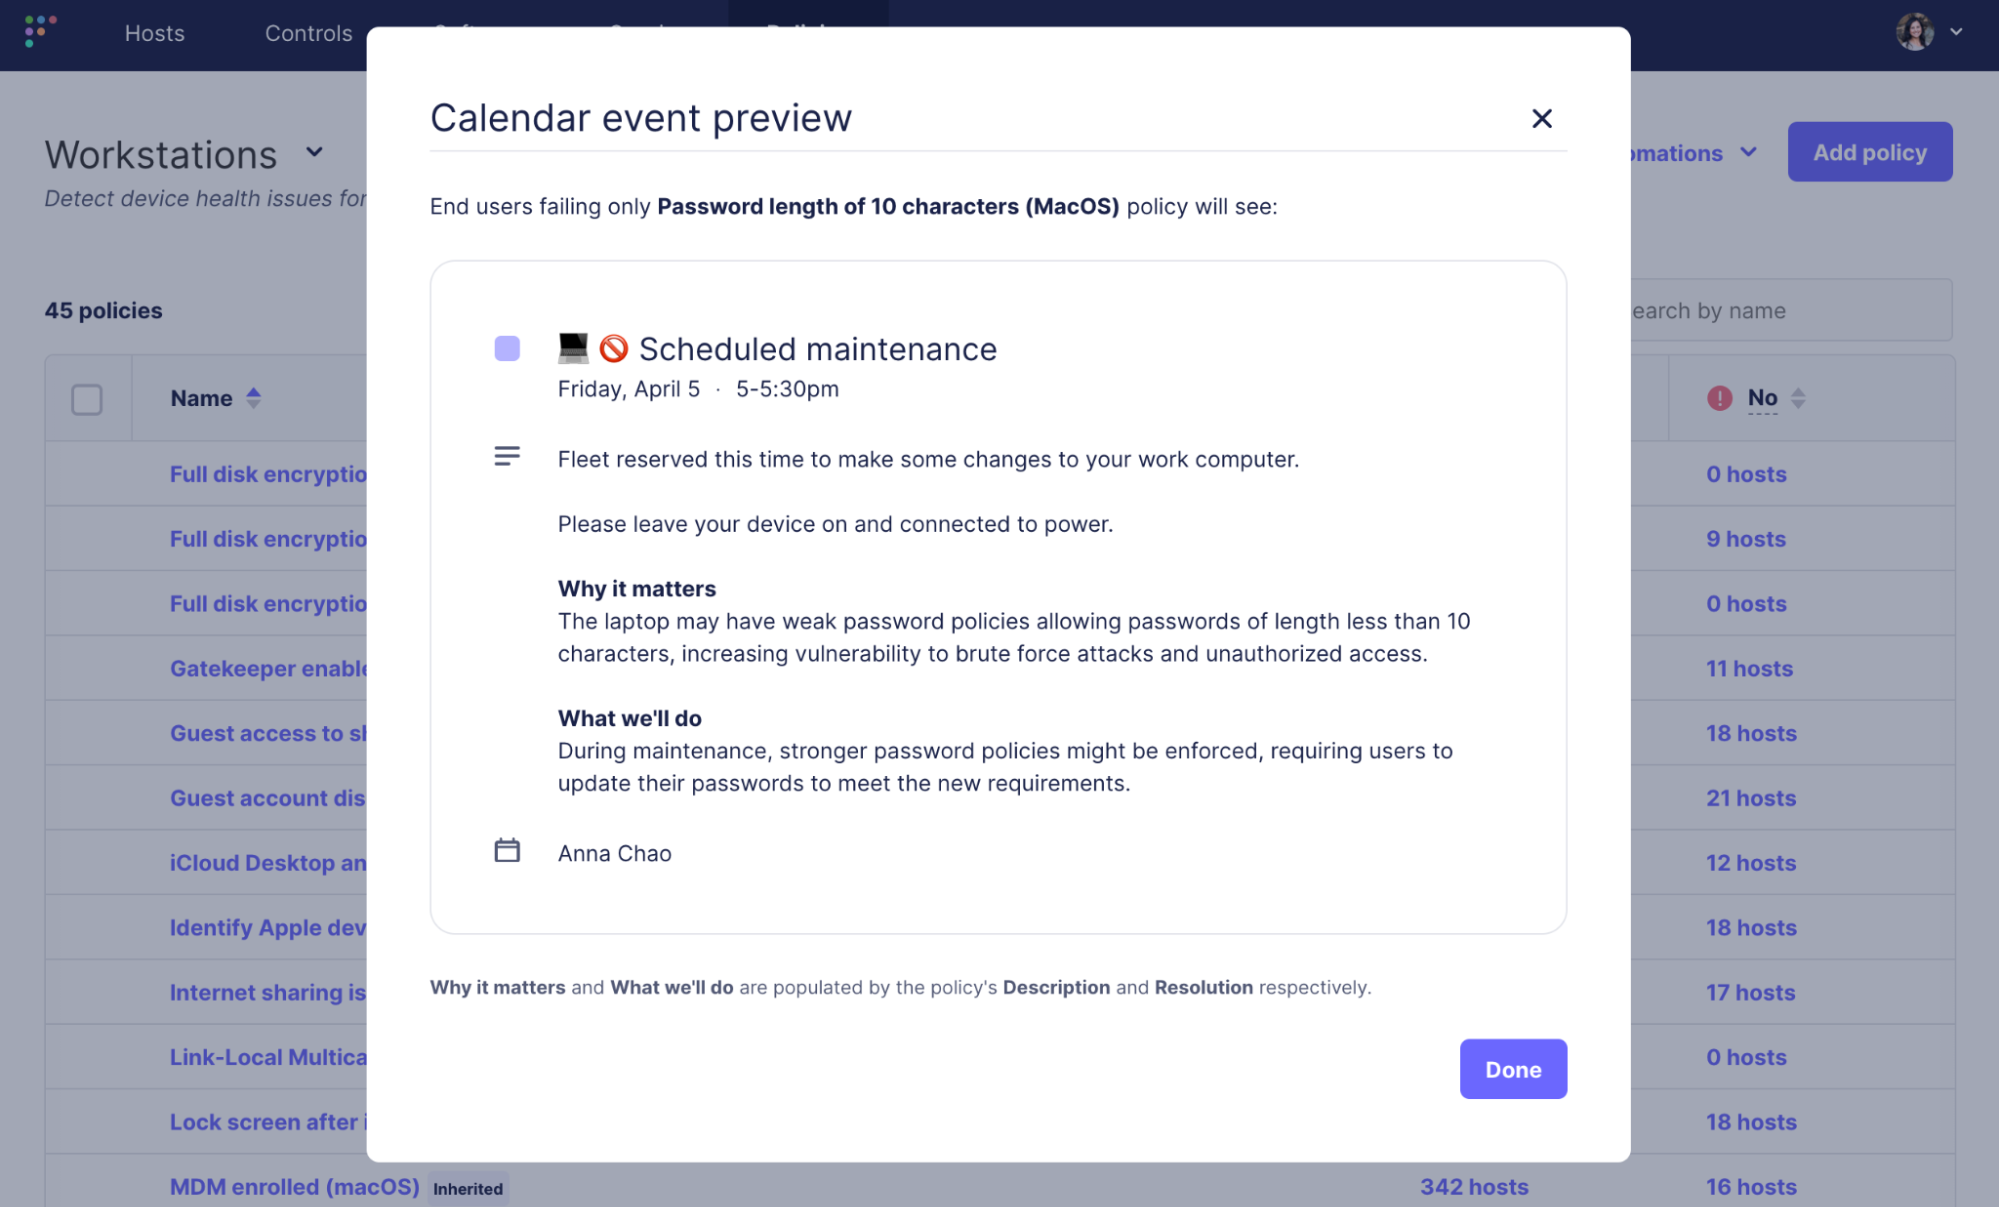 A preview of a failing policy’s calendar event uses a description and resolution written with AI assistance.